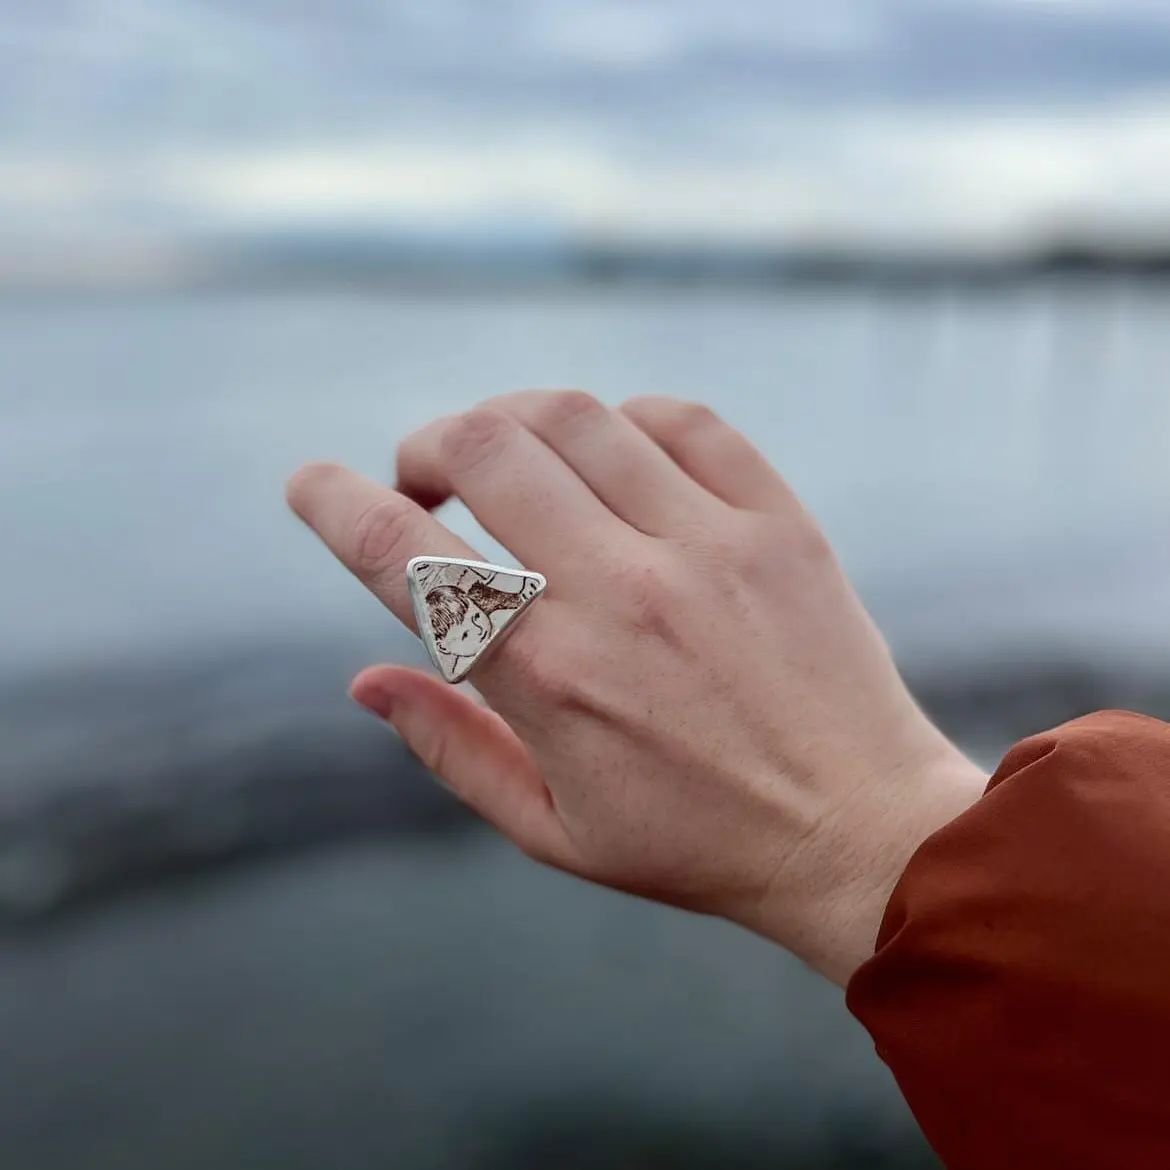 This beautiful shot was passed to me by @seaglass_serenity who bought this sea pottery ring from me recently. I just love to see my jewellery with their new owners, especially in faraway places I'd love to visit one day ❤️ 

This piece of pottery has